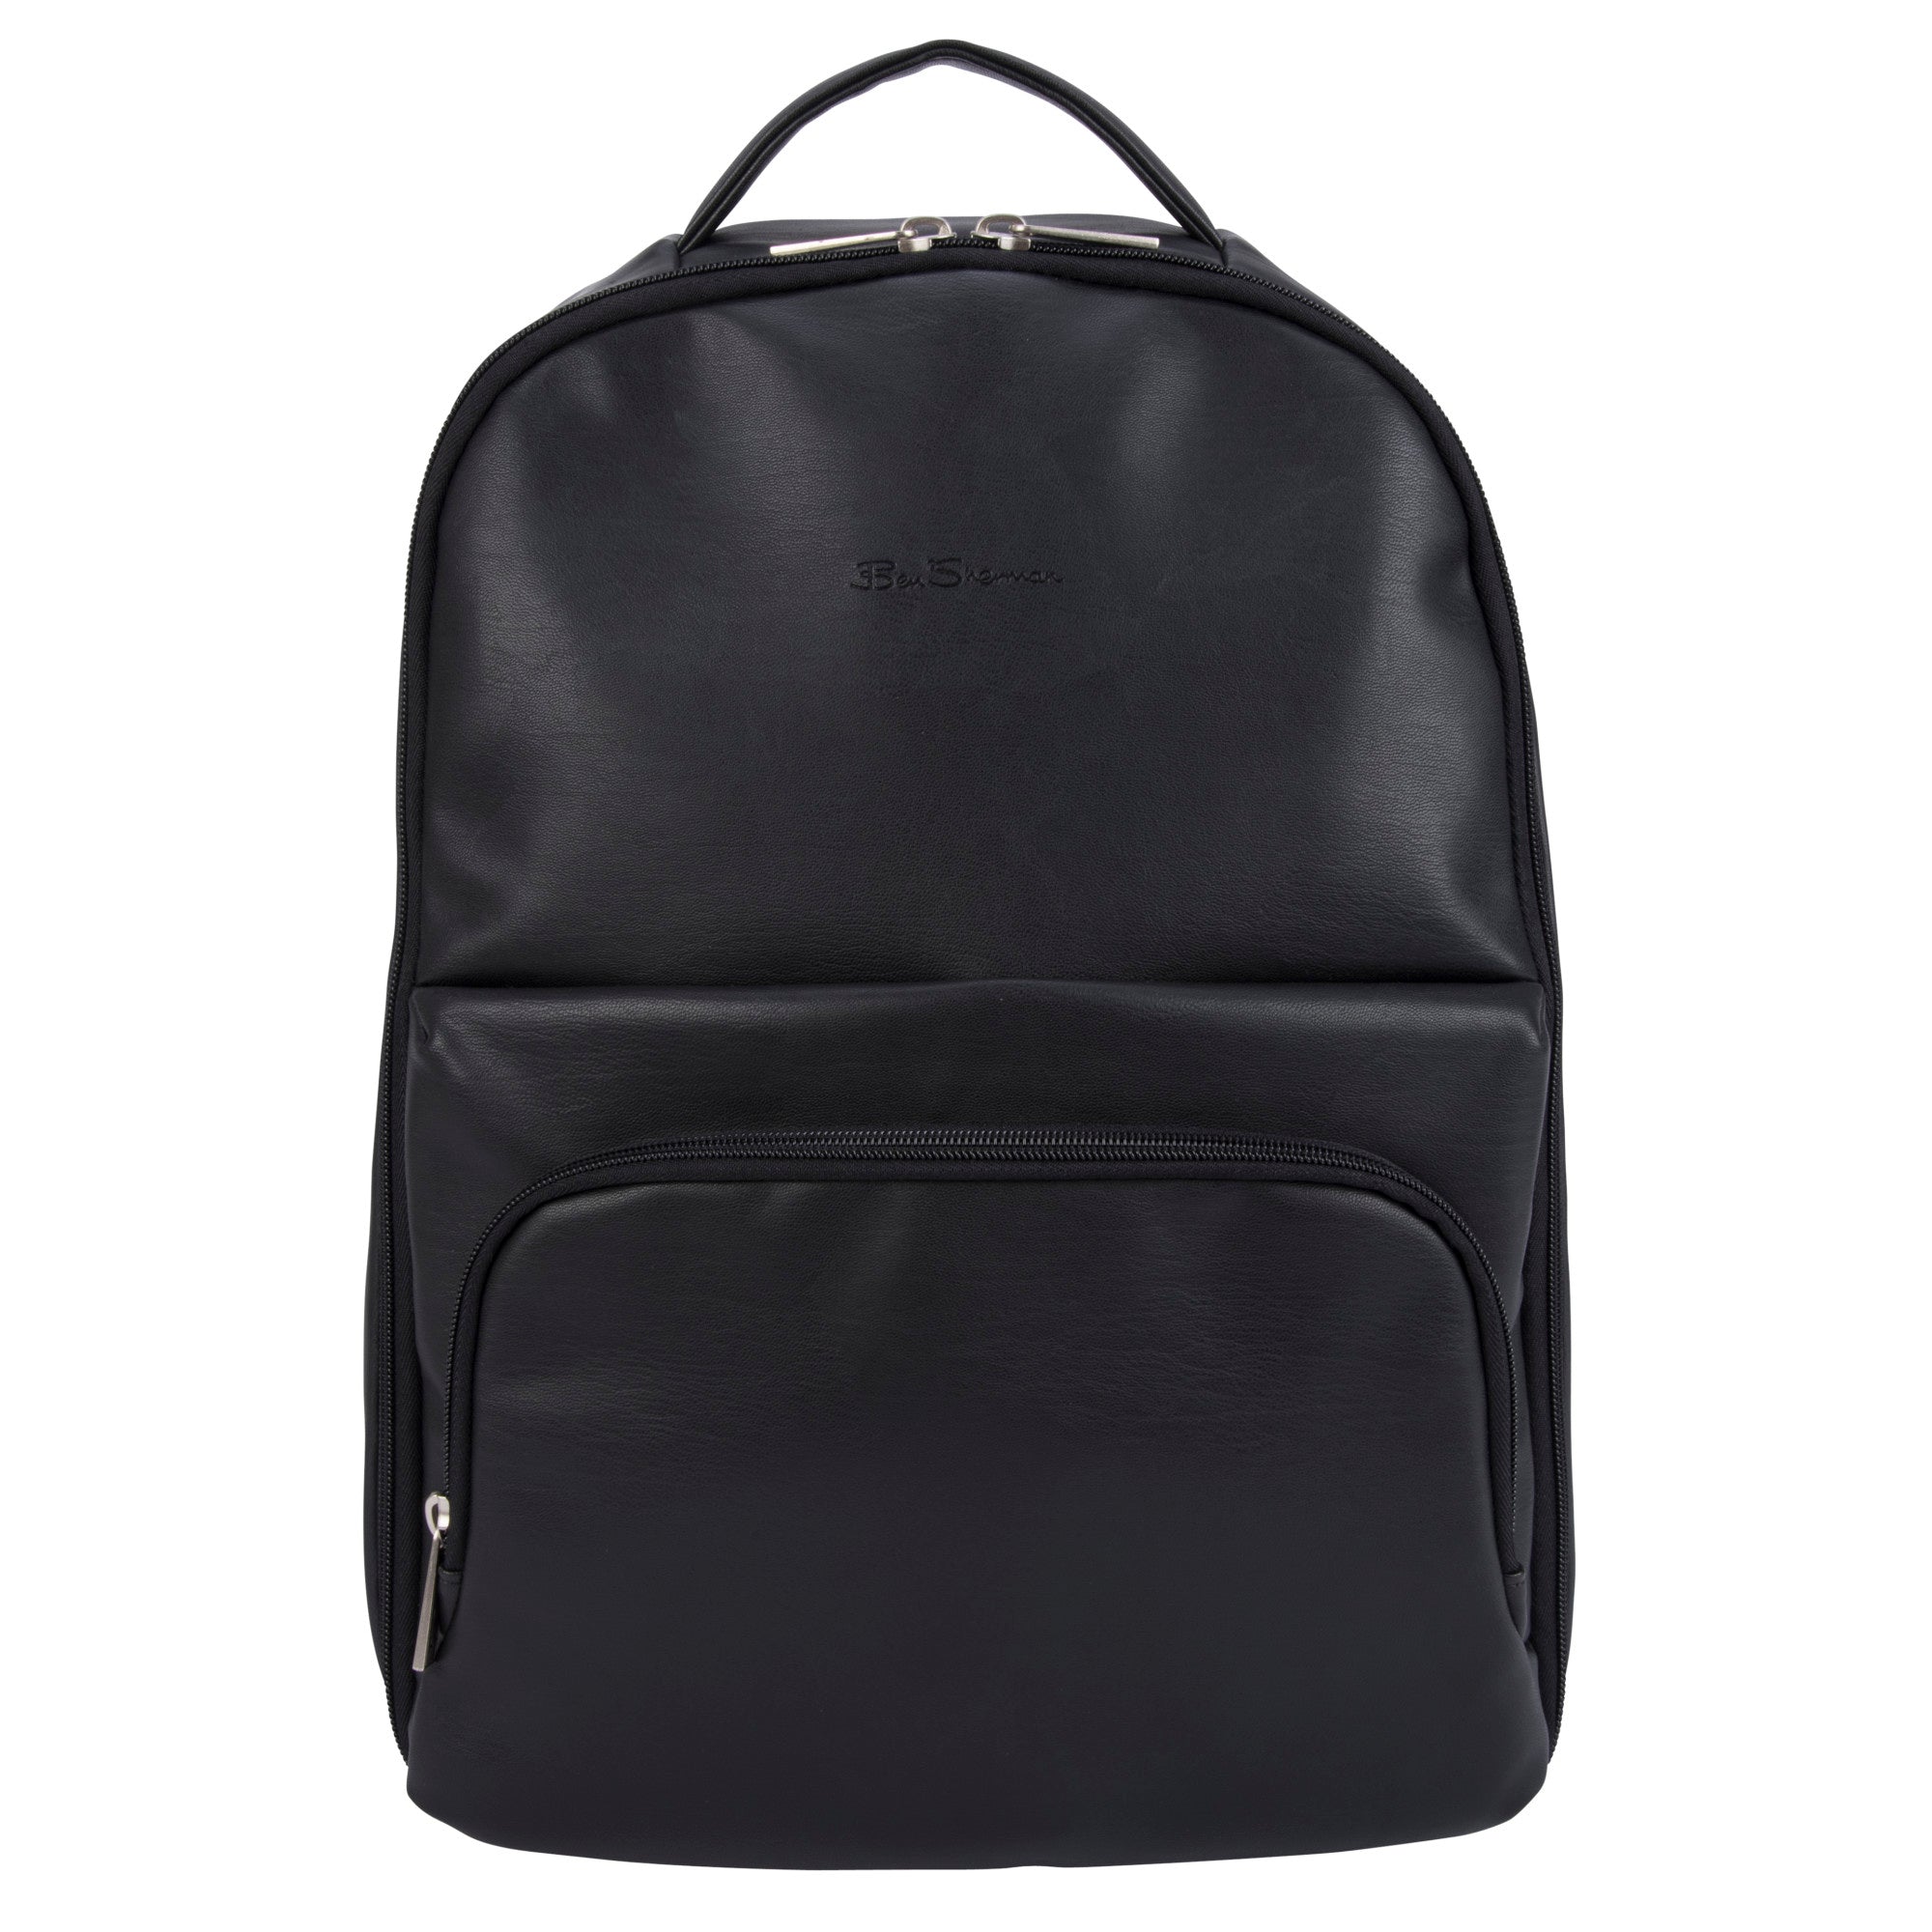 Ben Sherman Faux Leather Single Compartment Top Zip 15.6" Computer Backpack - BS17010502